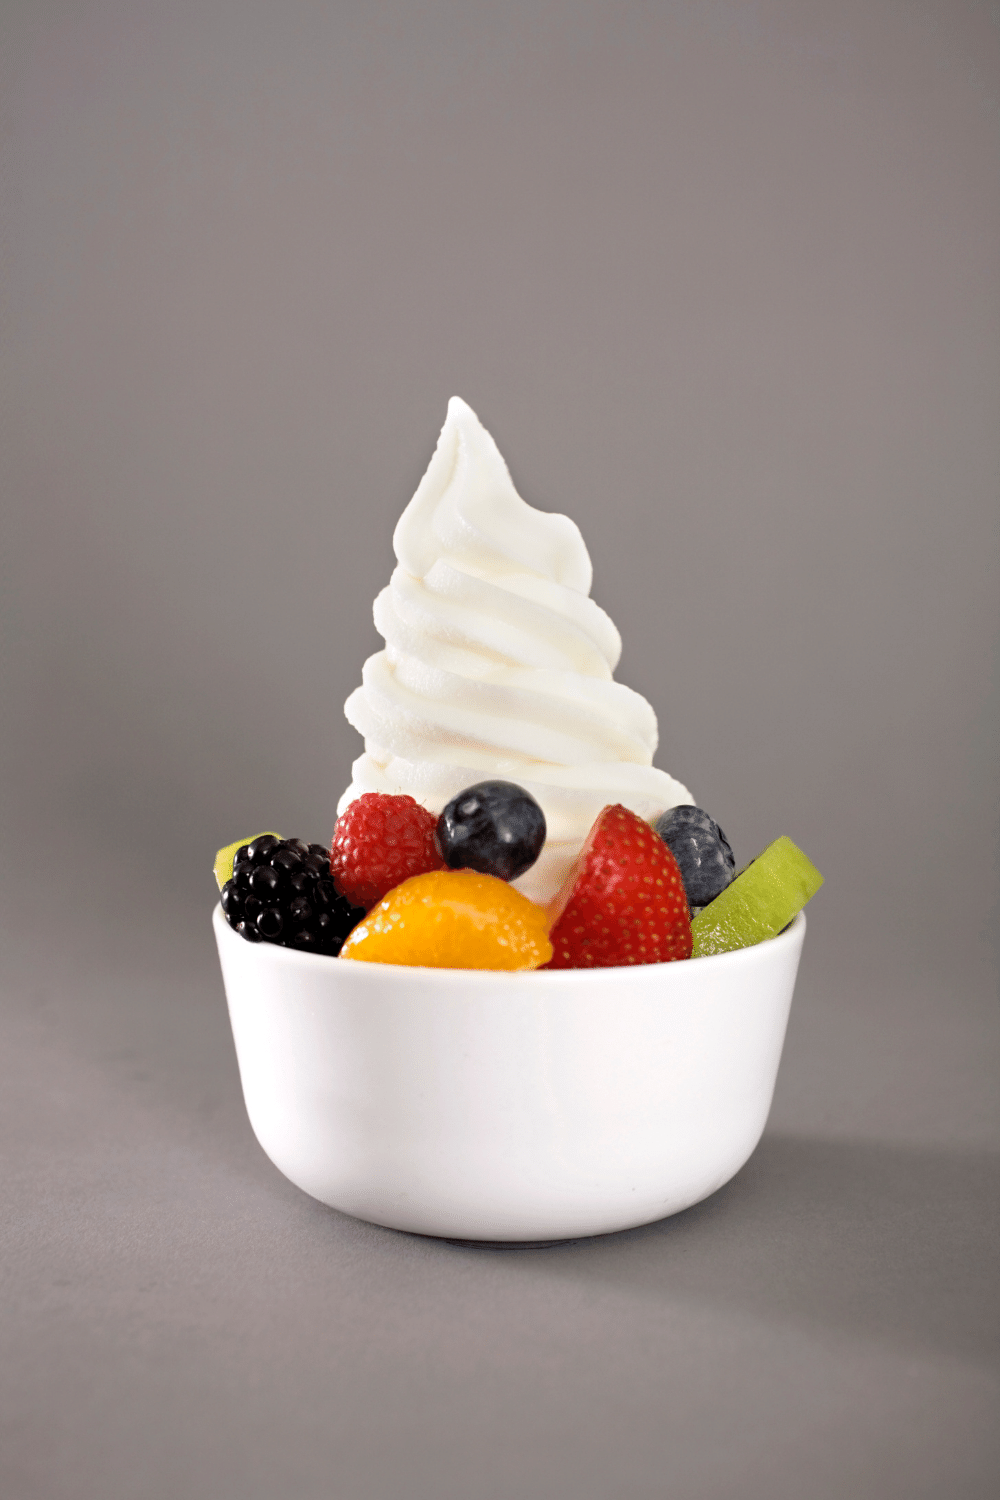 Making Frozen Yogurt At Home – It’s Easier Than You Think!